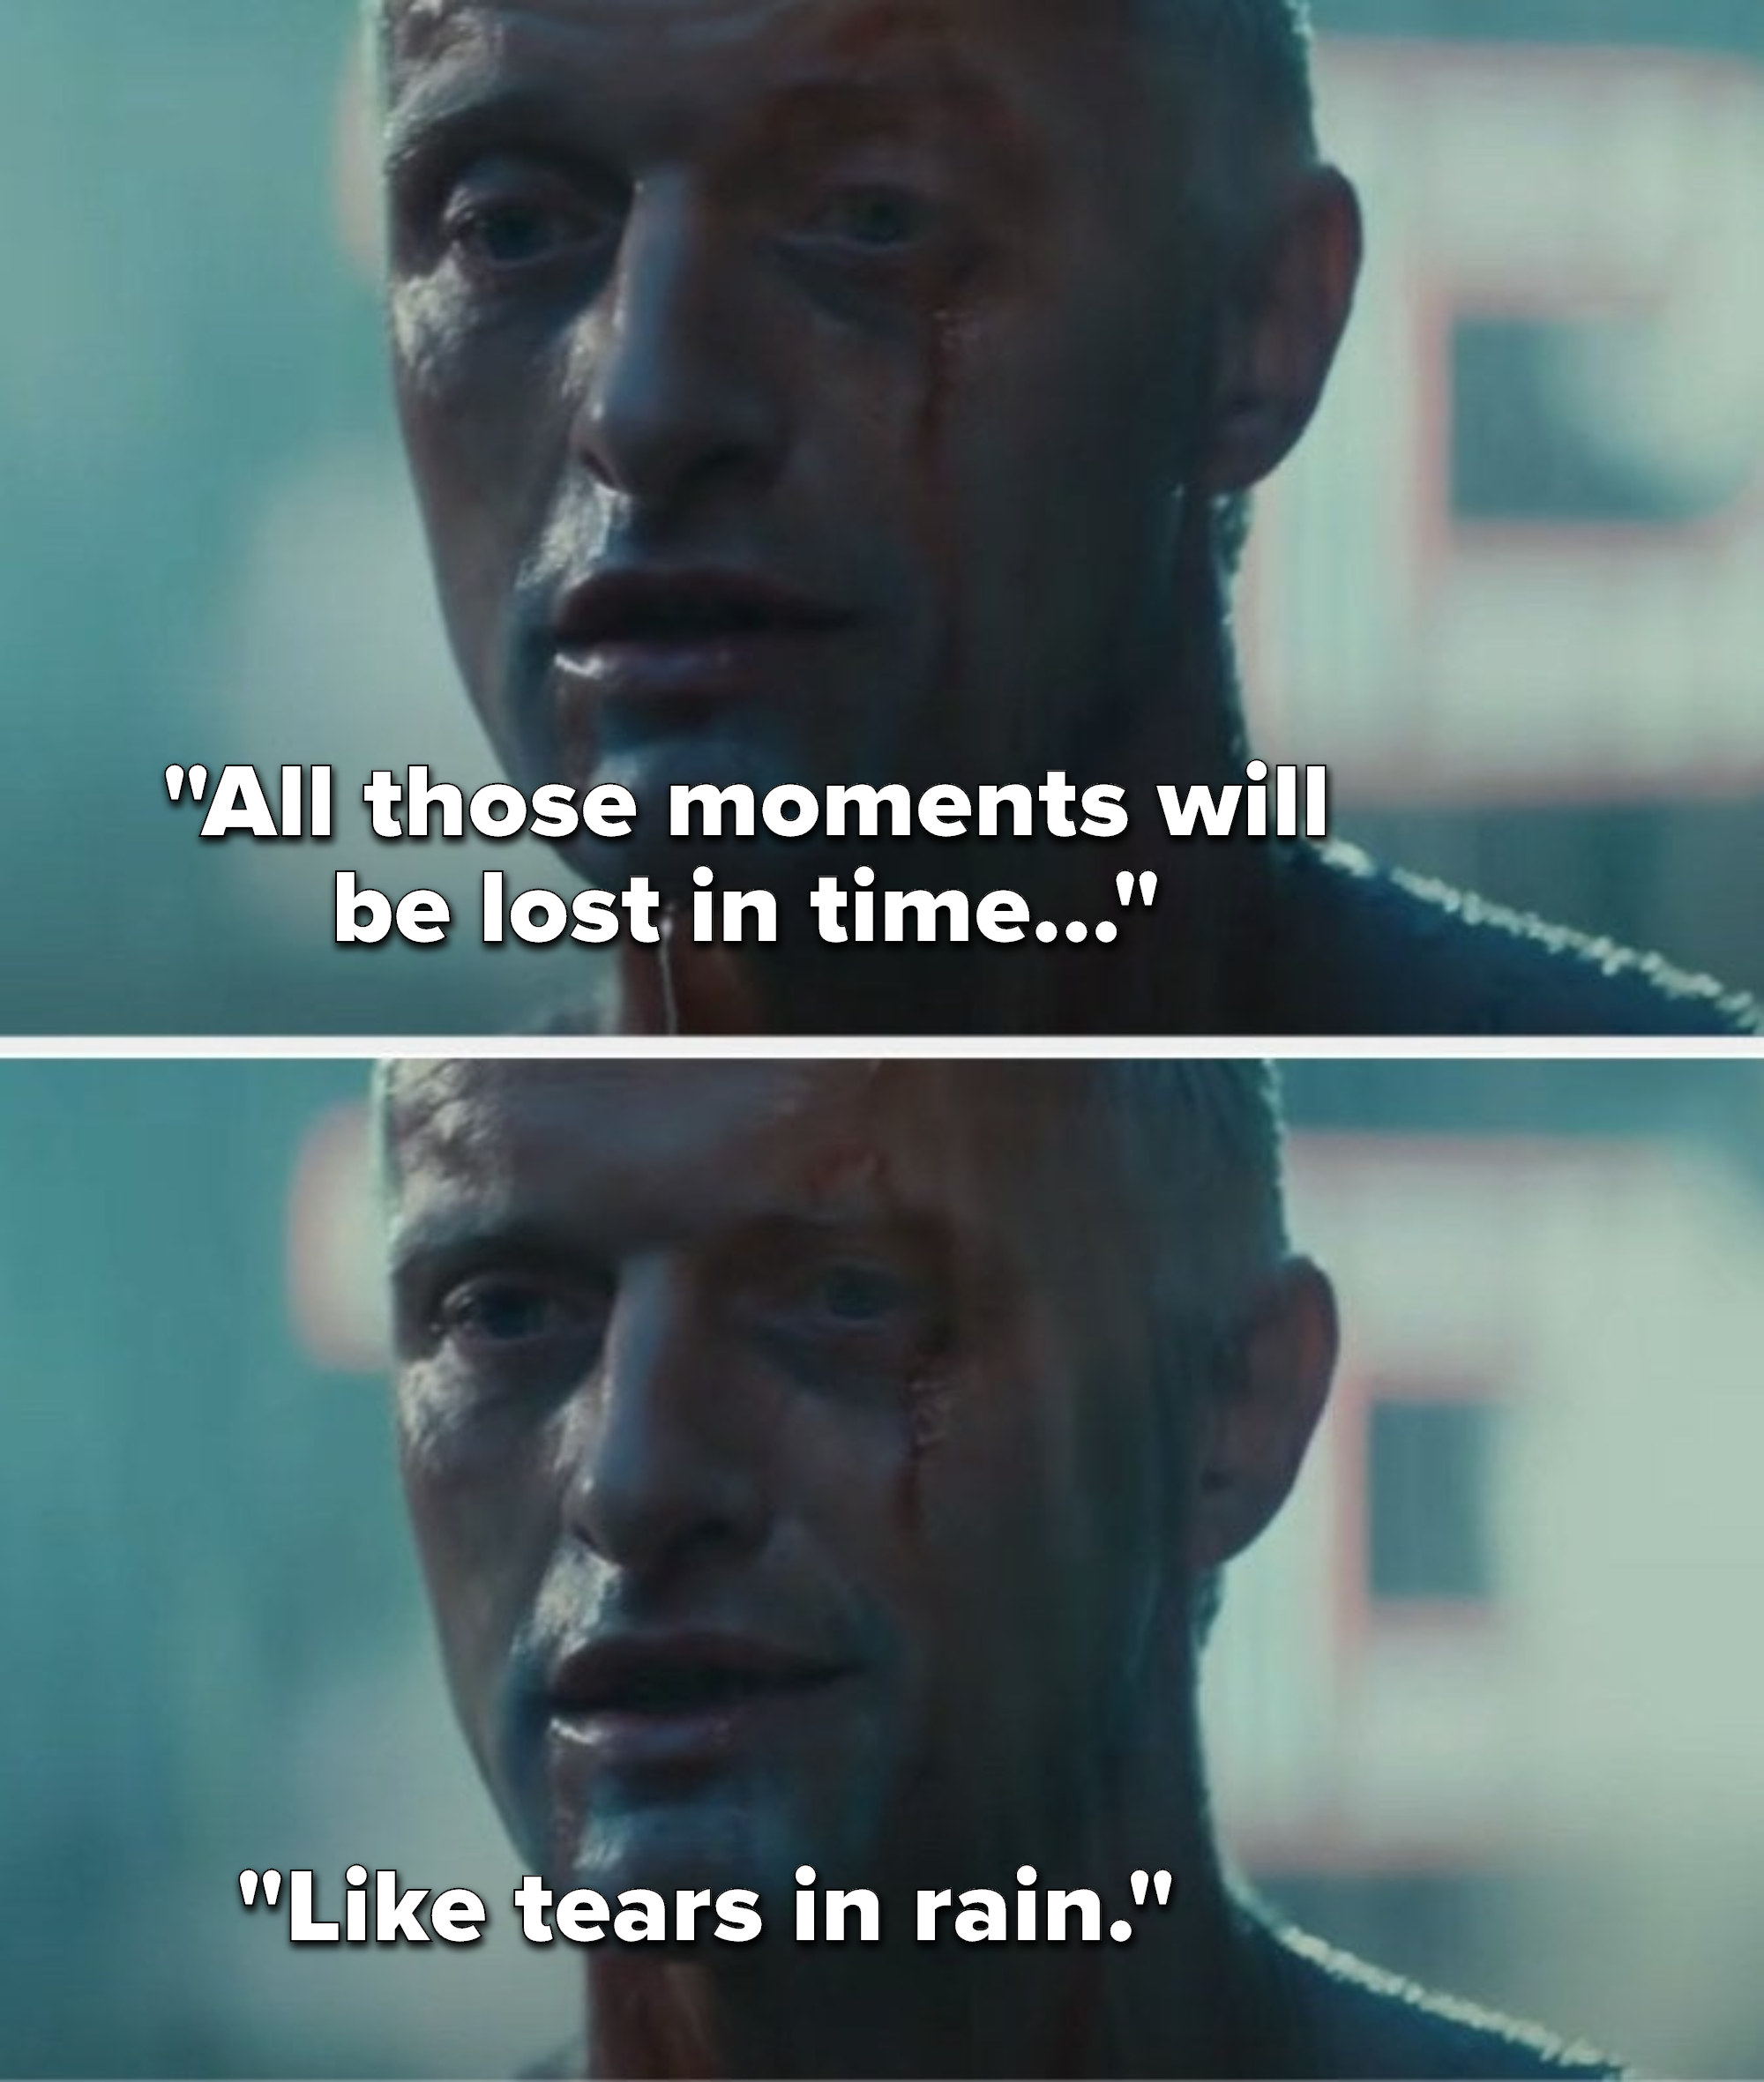 Roy Batty says, &quot;All those moments will be lost in time, like tears in rain&quot;